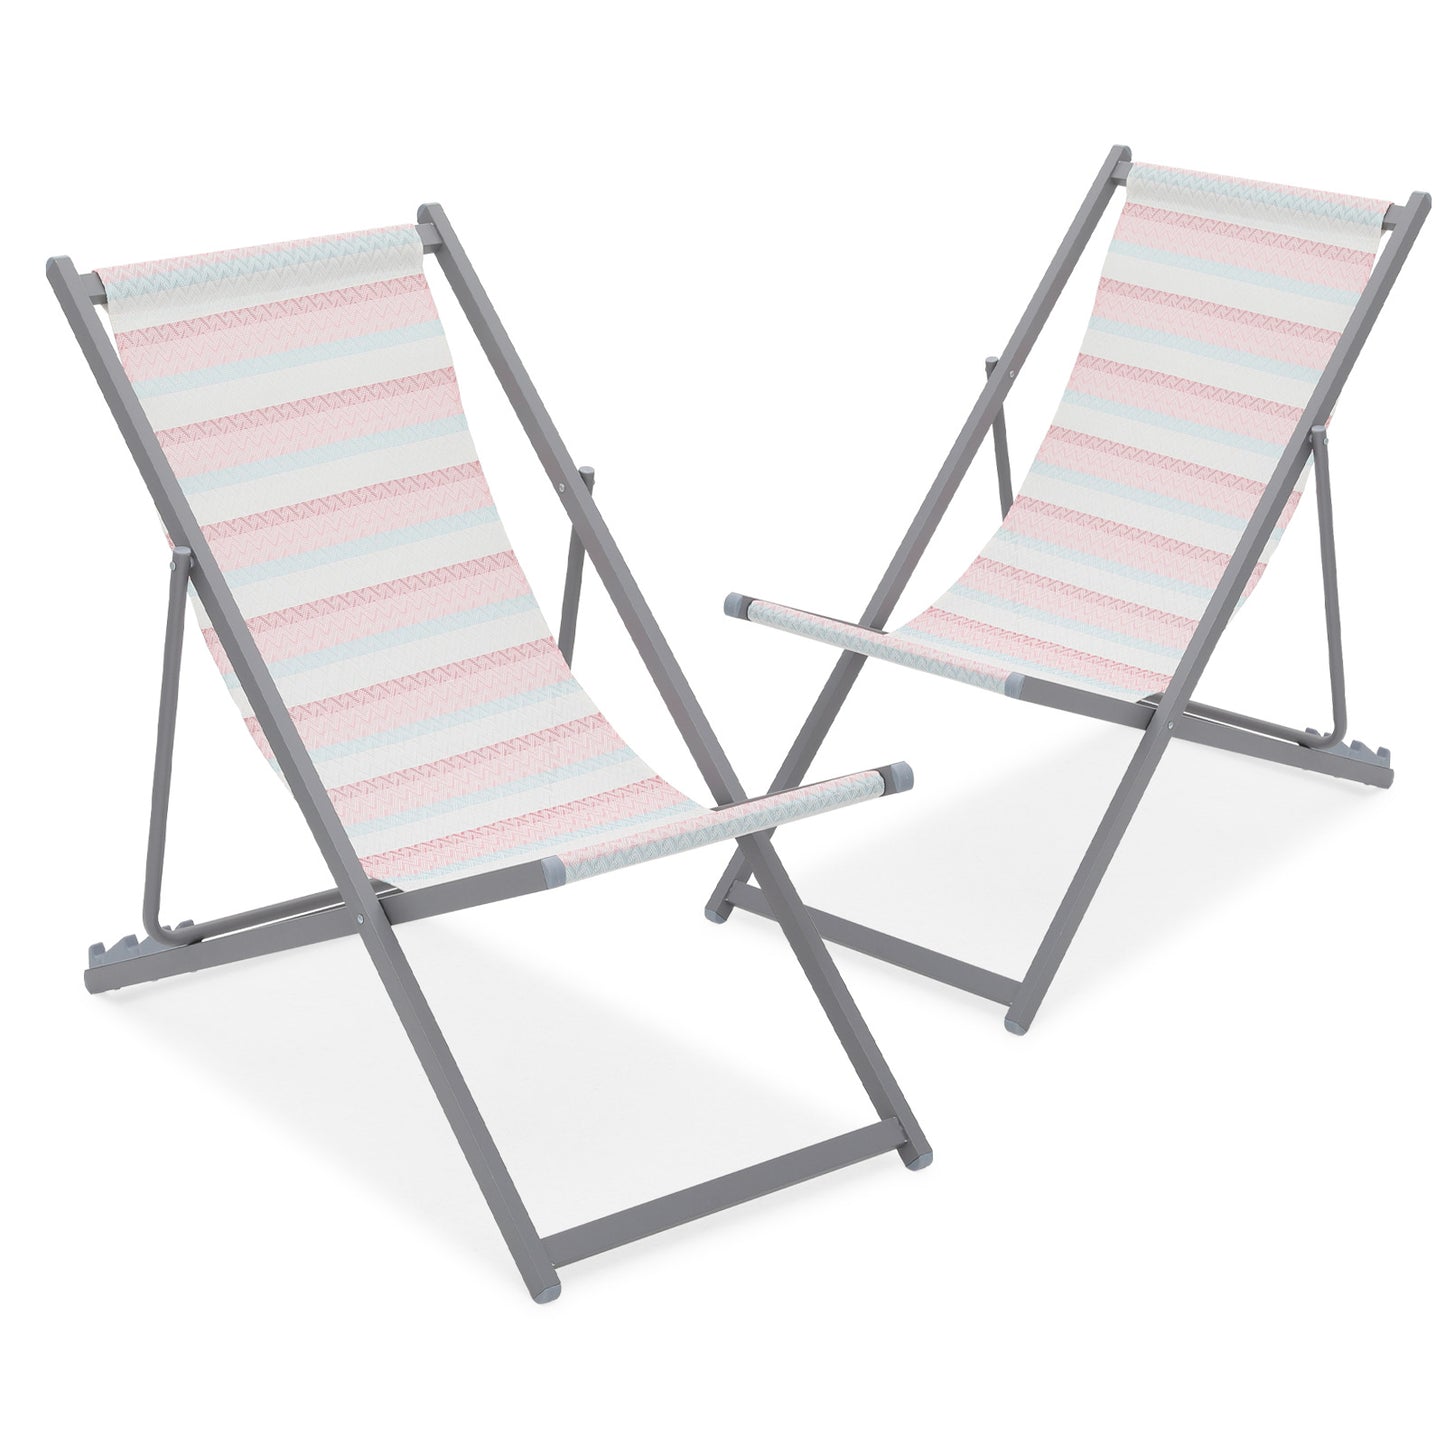 Reclinable Foldable Beach Sling Chair - Teslin Fabric Seat